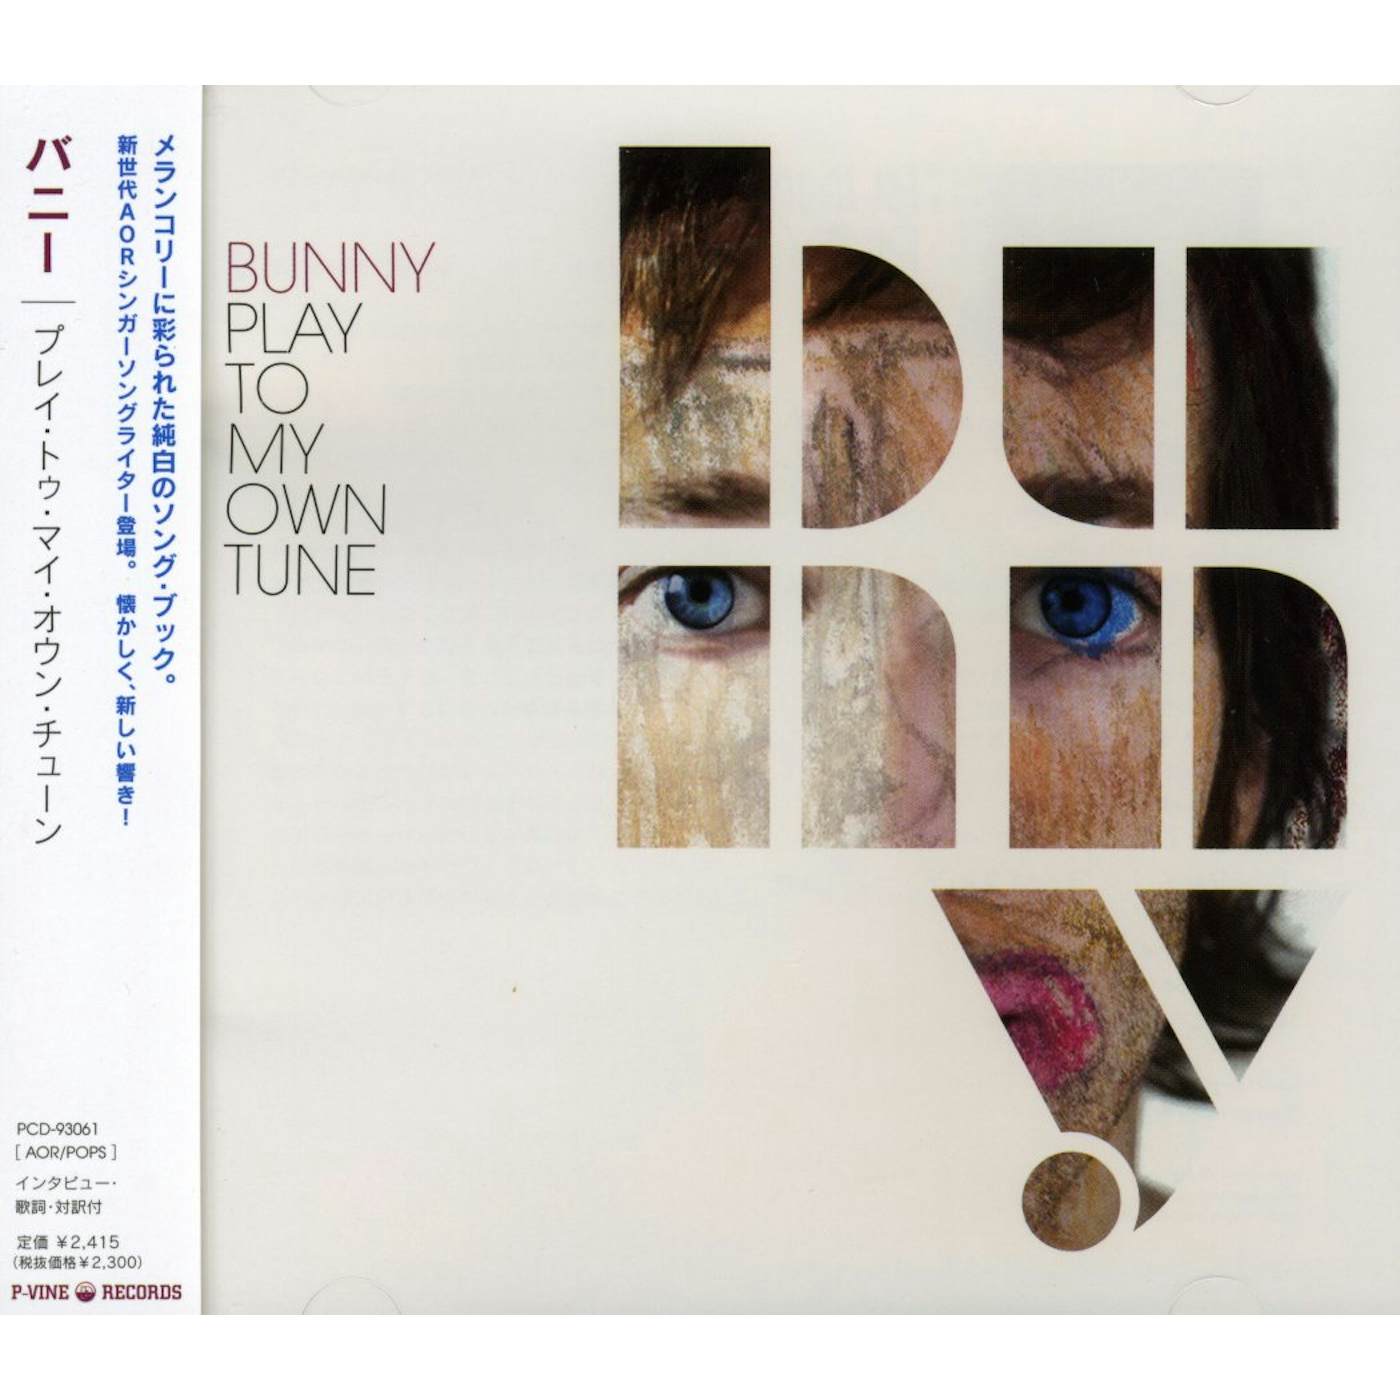 BUNNY PLAY TO MY OWN TUNE CD